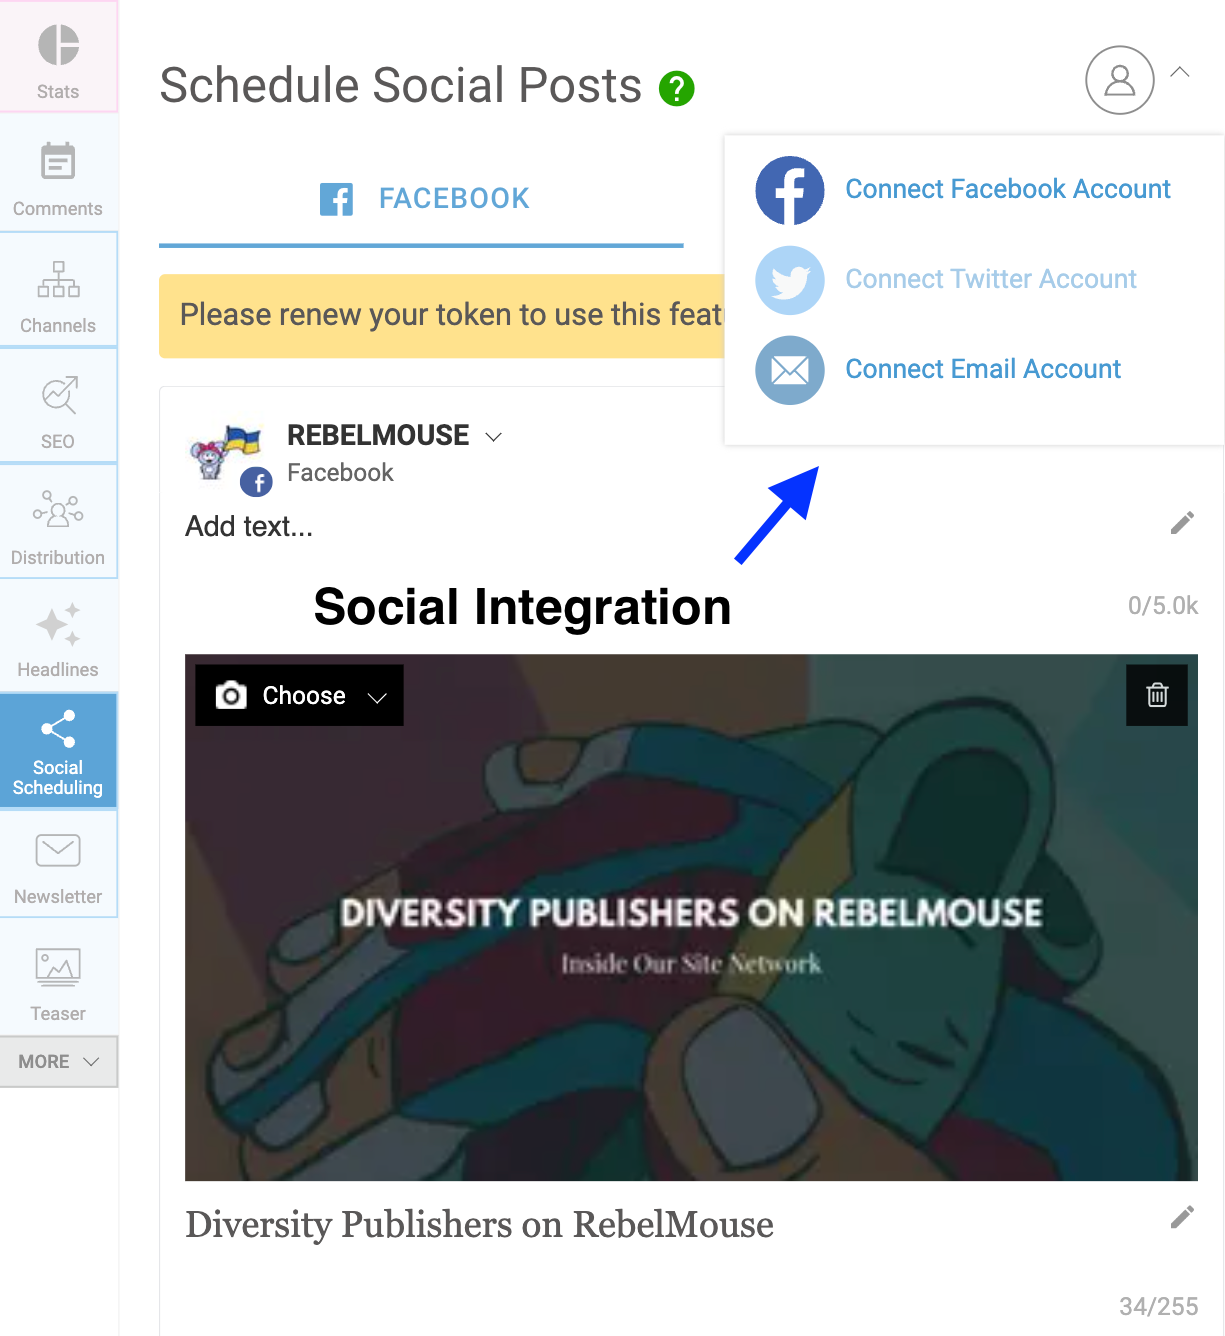  RebelMouse's CMS integrates social media scheduling channels